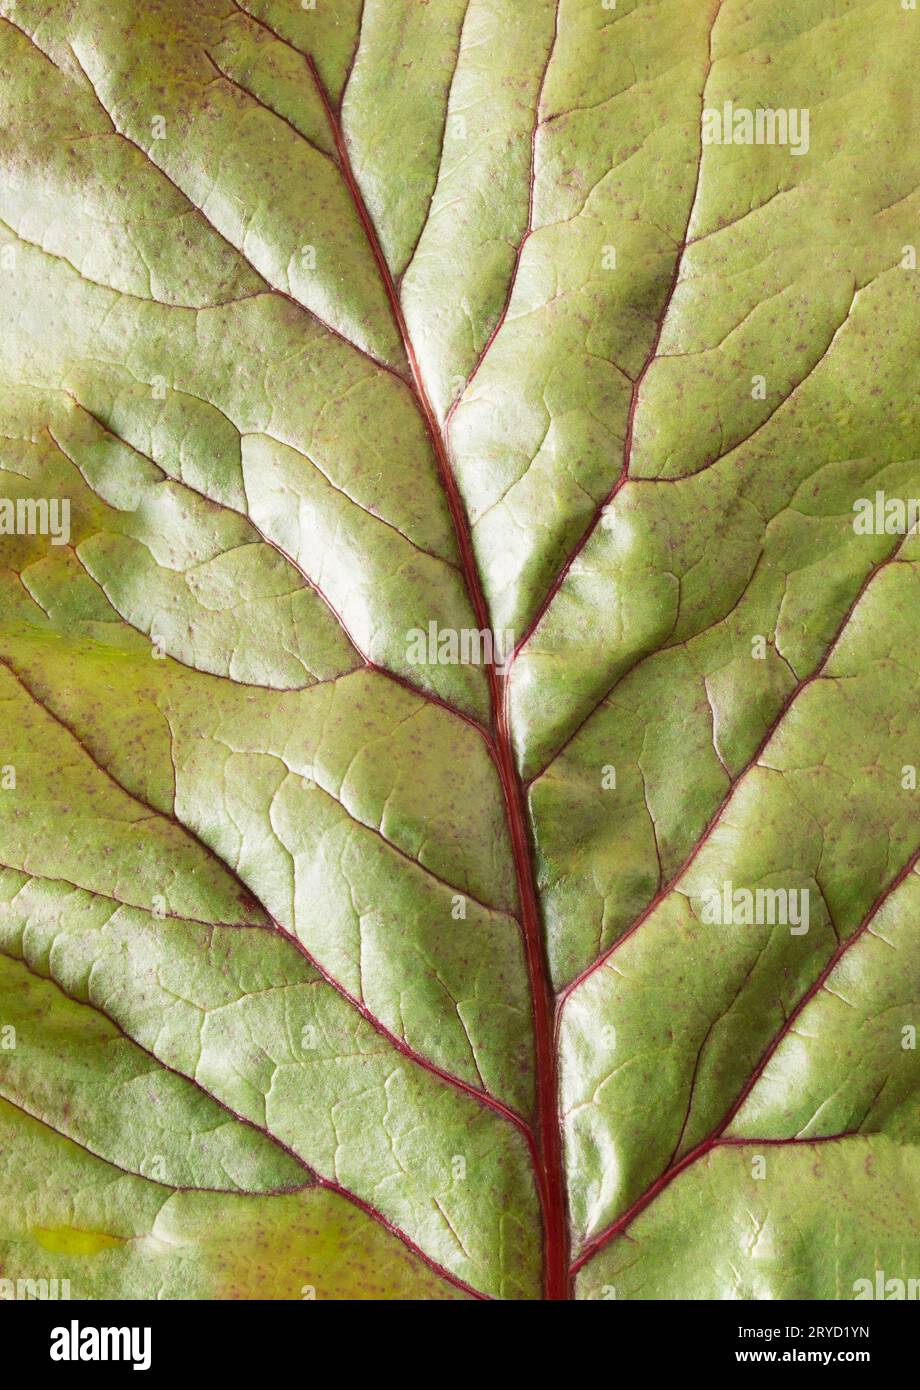 Beet leaf adaxiall, textured background at extreme close-up. Stock Photo